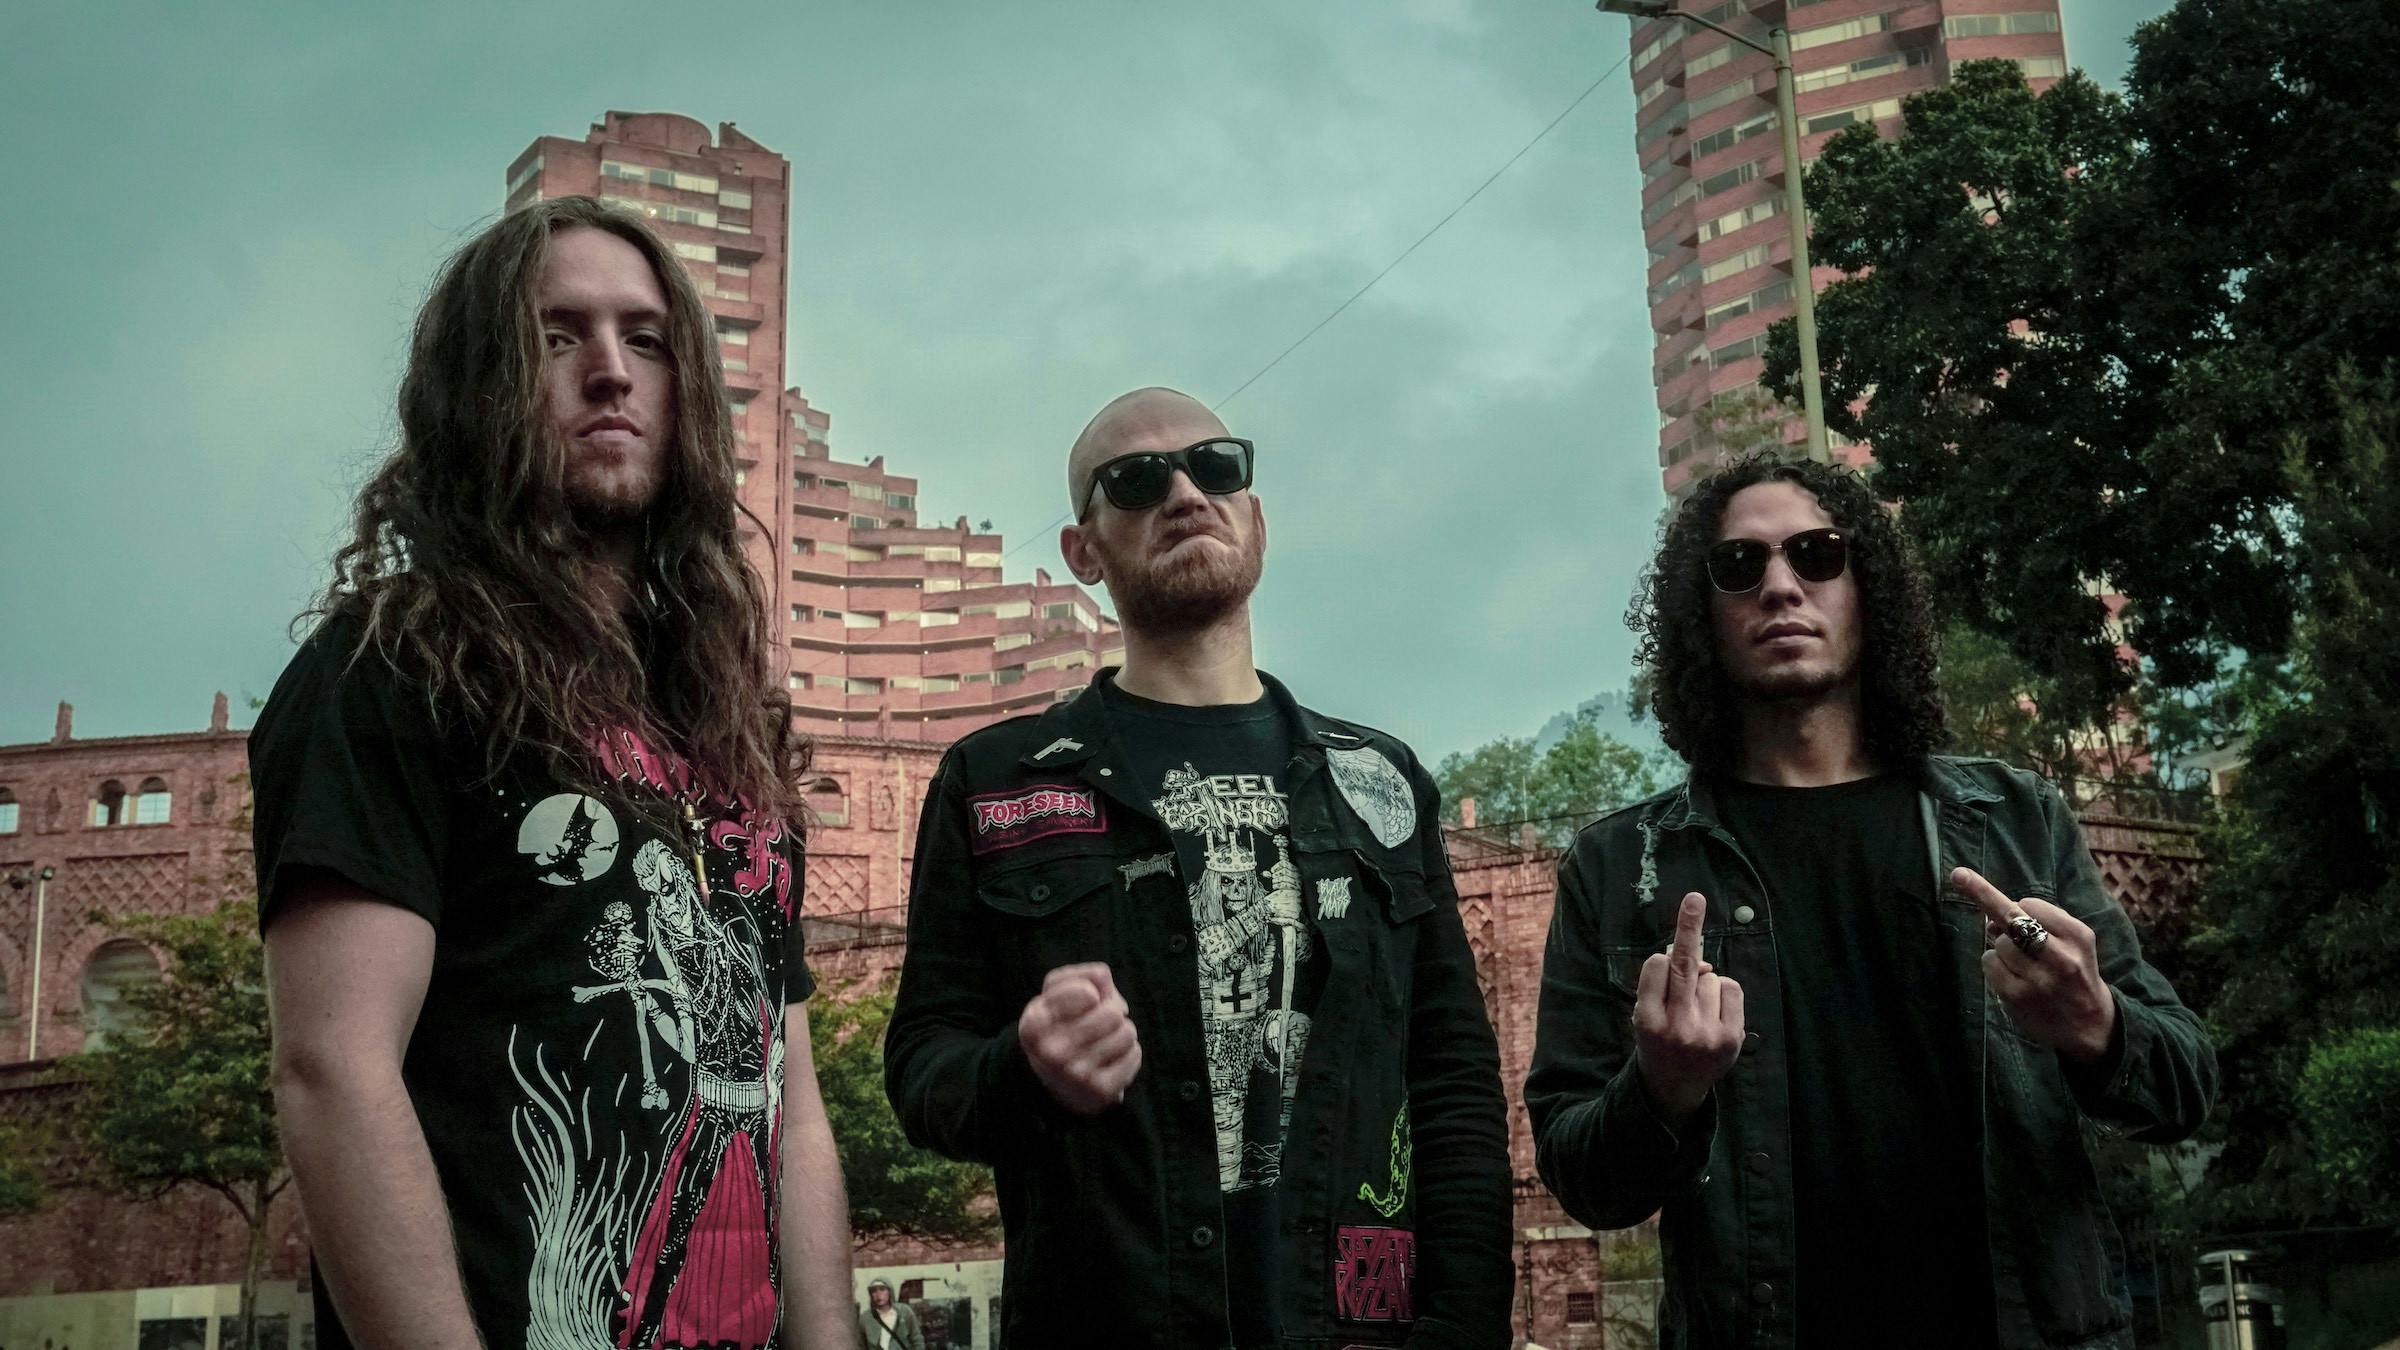 Black Mass' New Video Is Everything You Love About Old-School Thrash